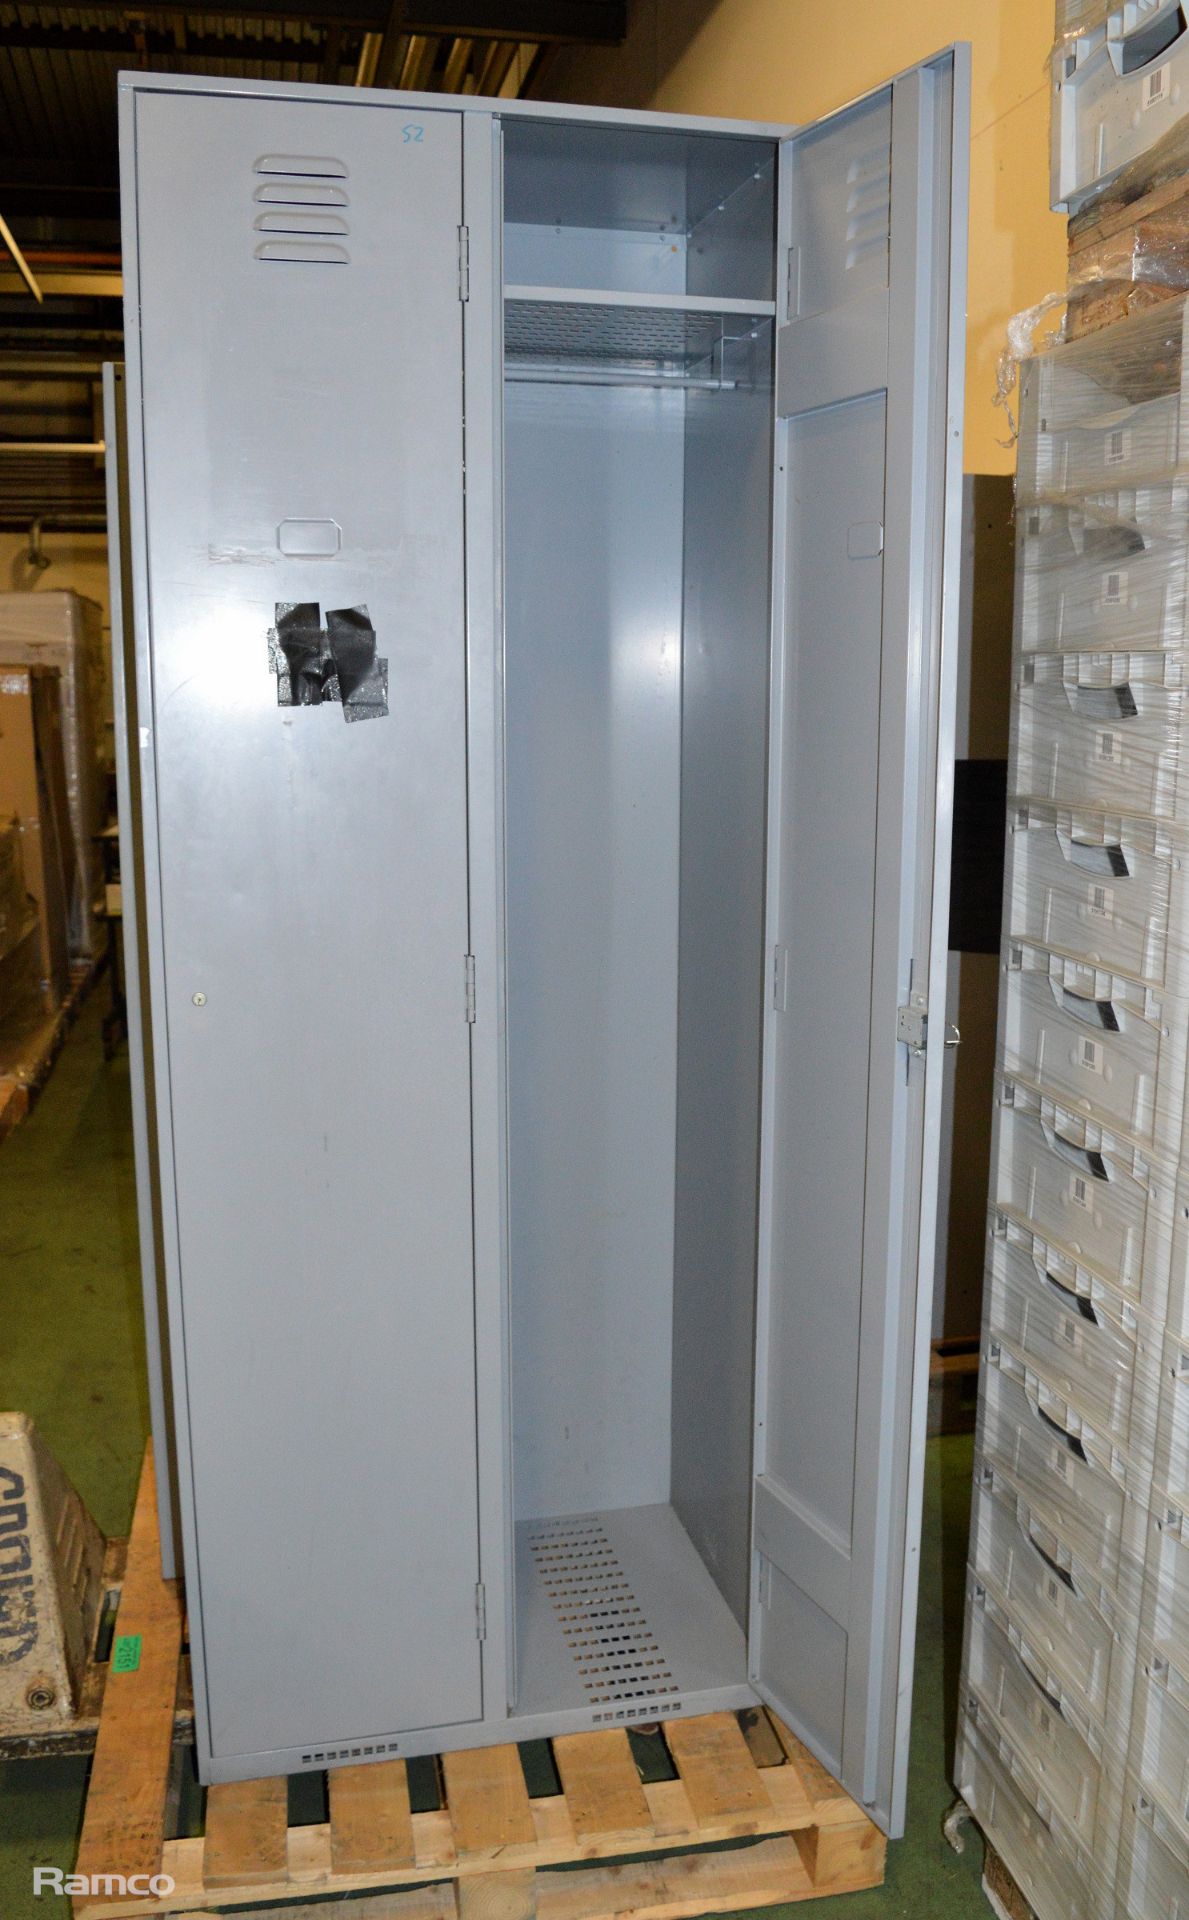 2x Metal Lockers - L450 x W450 x H1800 mm, 1 Metal locker - W 760mm x D 510mm x 2010mm - Image 4 of 4